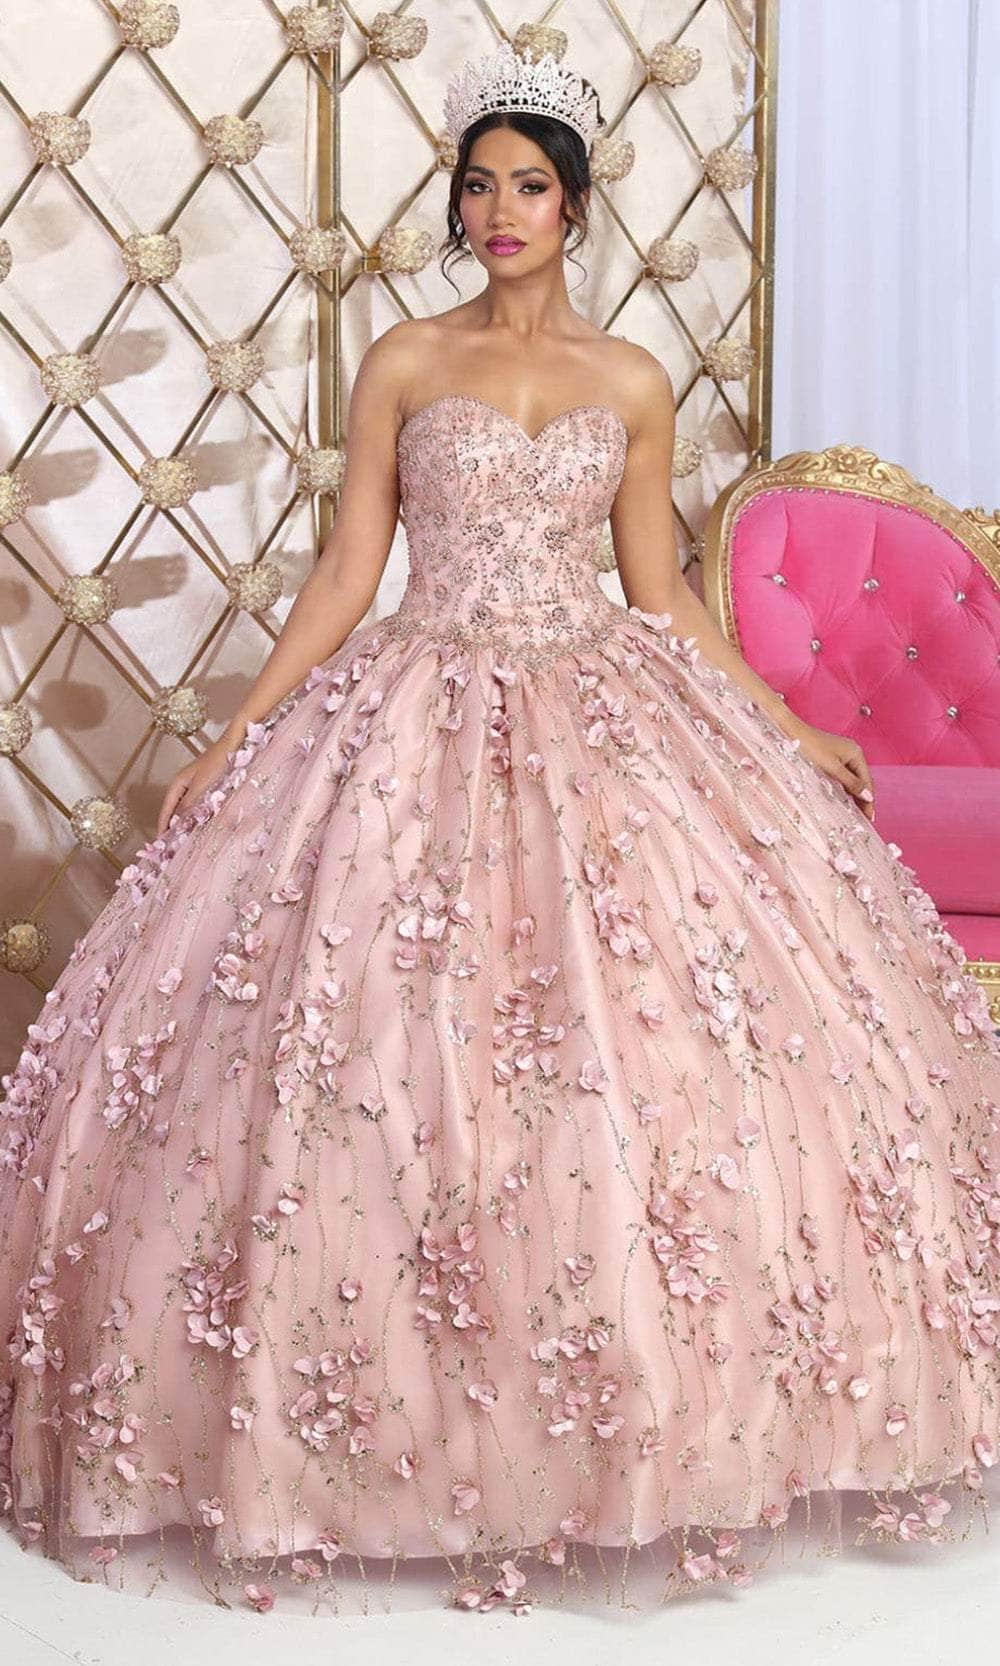 May Queen LK217 - Applique Sweetheart Ballgown Quinceanera Dresses 4 / Rose Gold